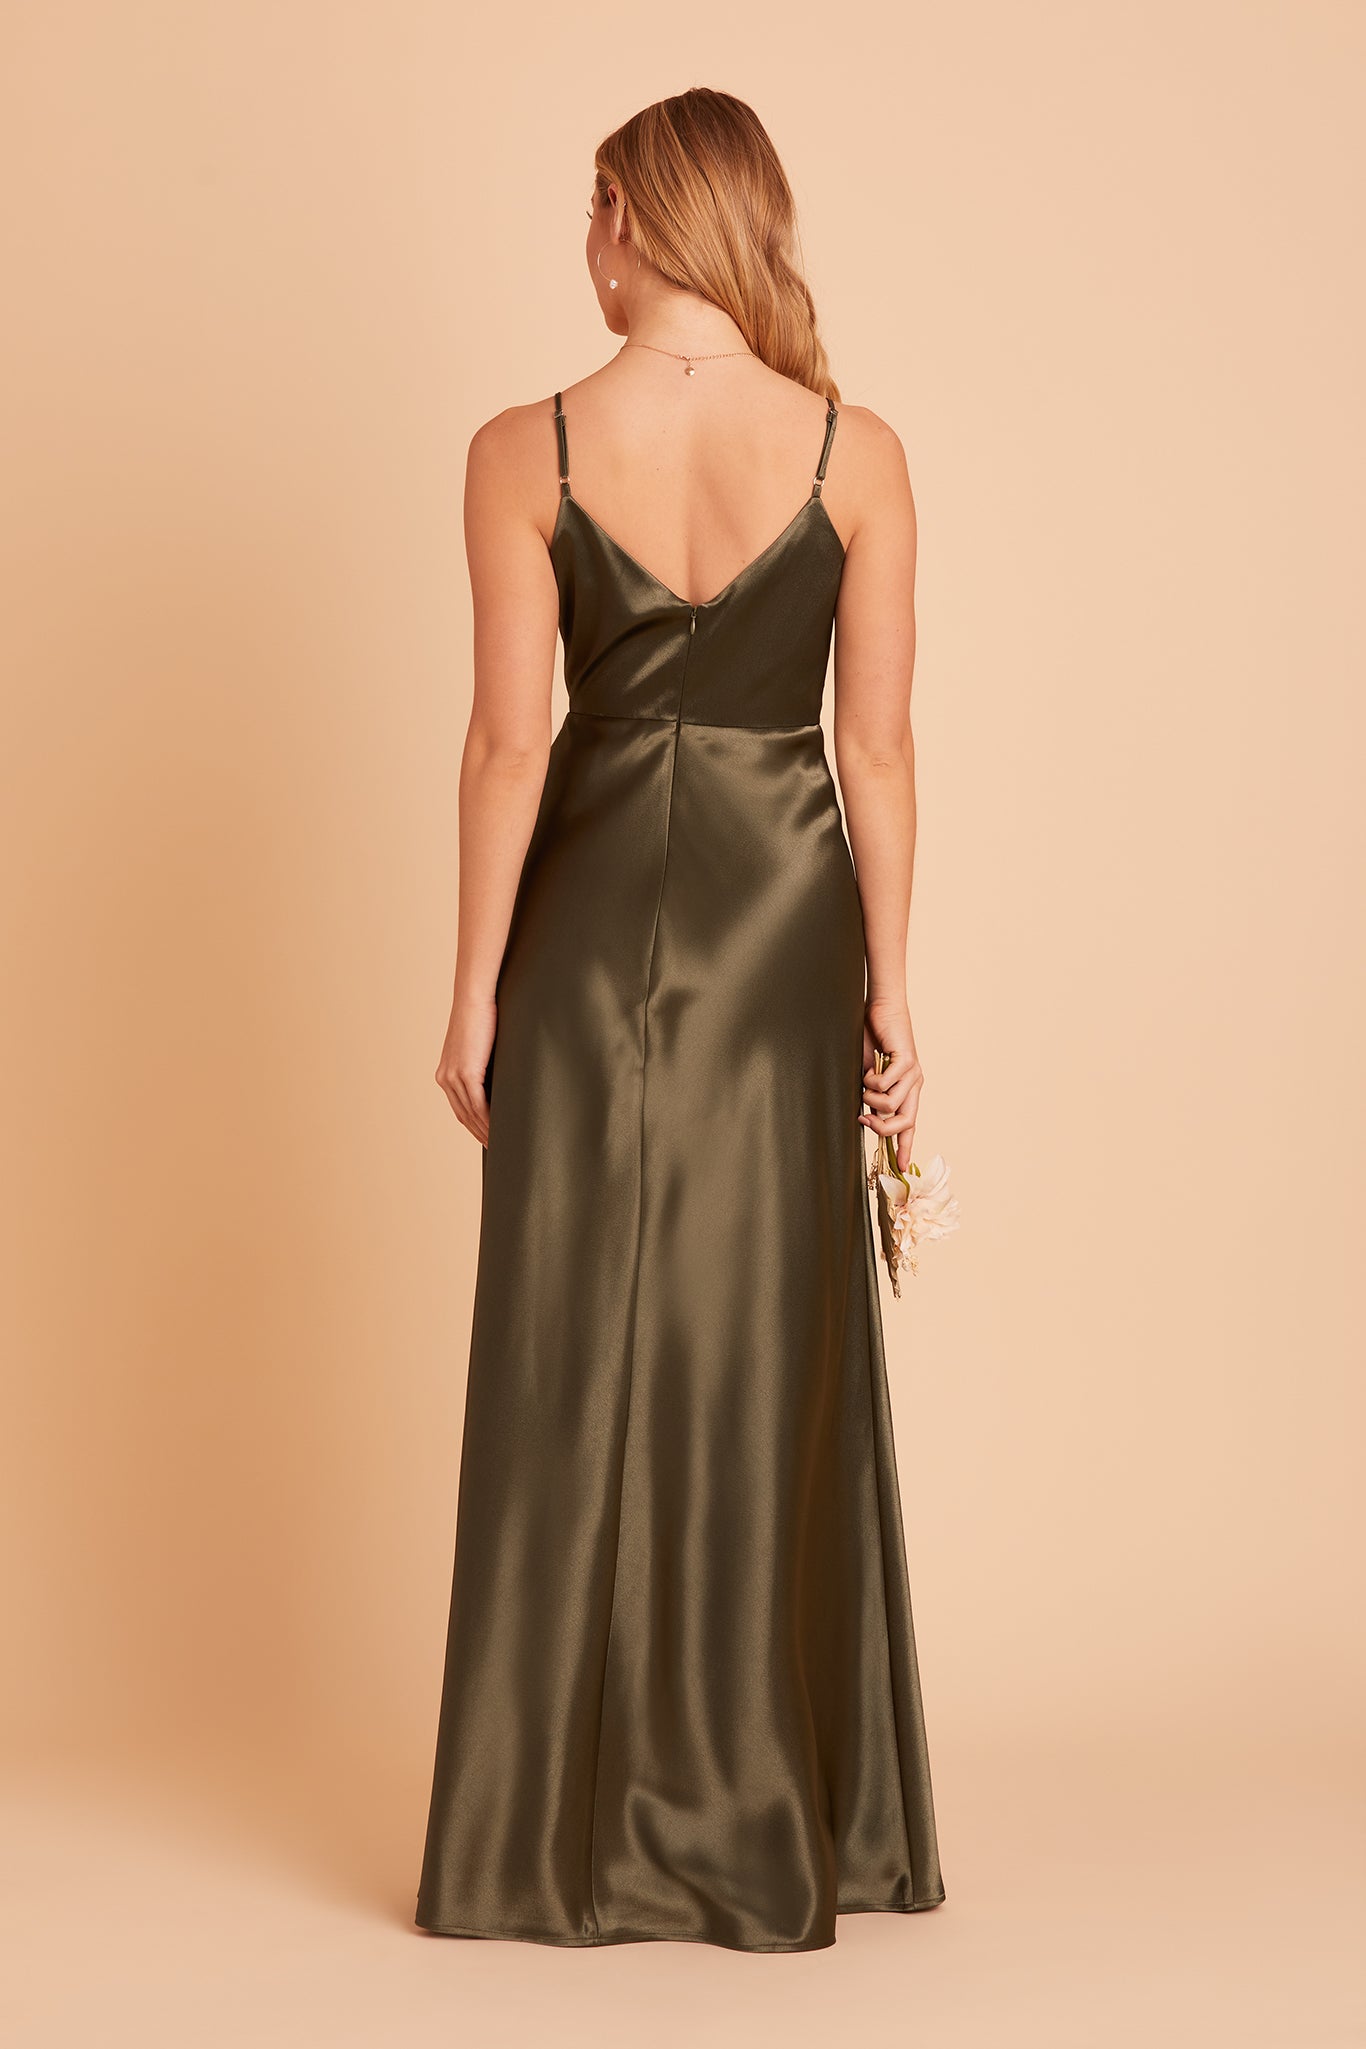 Jay bridesmaid dress with slit in olive satin by Birdy Grey, back view